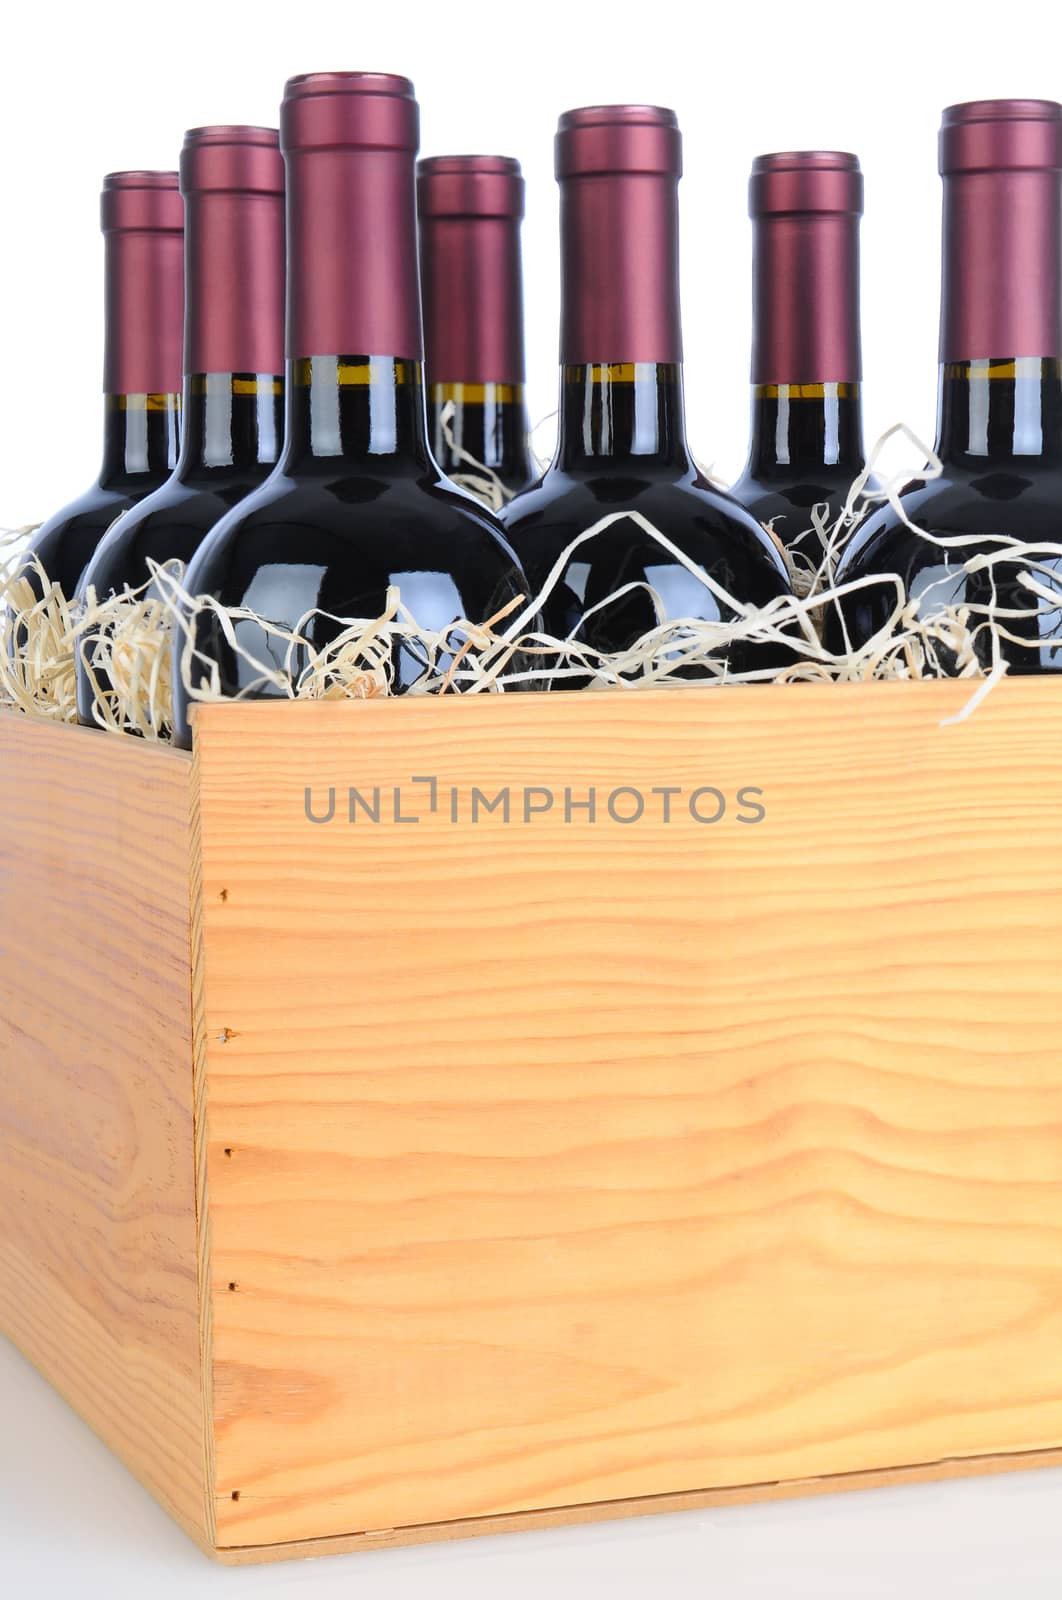 Cabernet Sauvignon wine bottles in a wooden crate. Vertical format isolated on white with reflection.